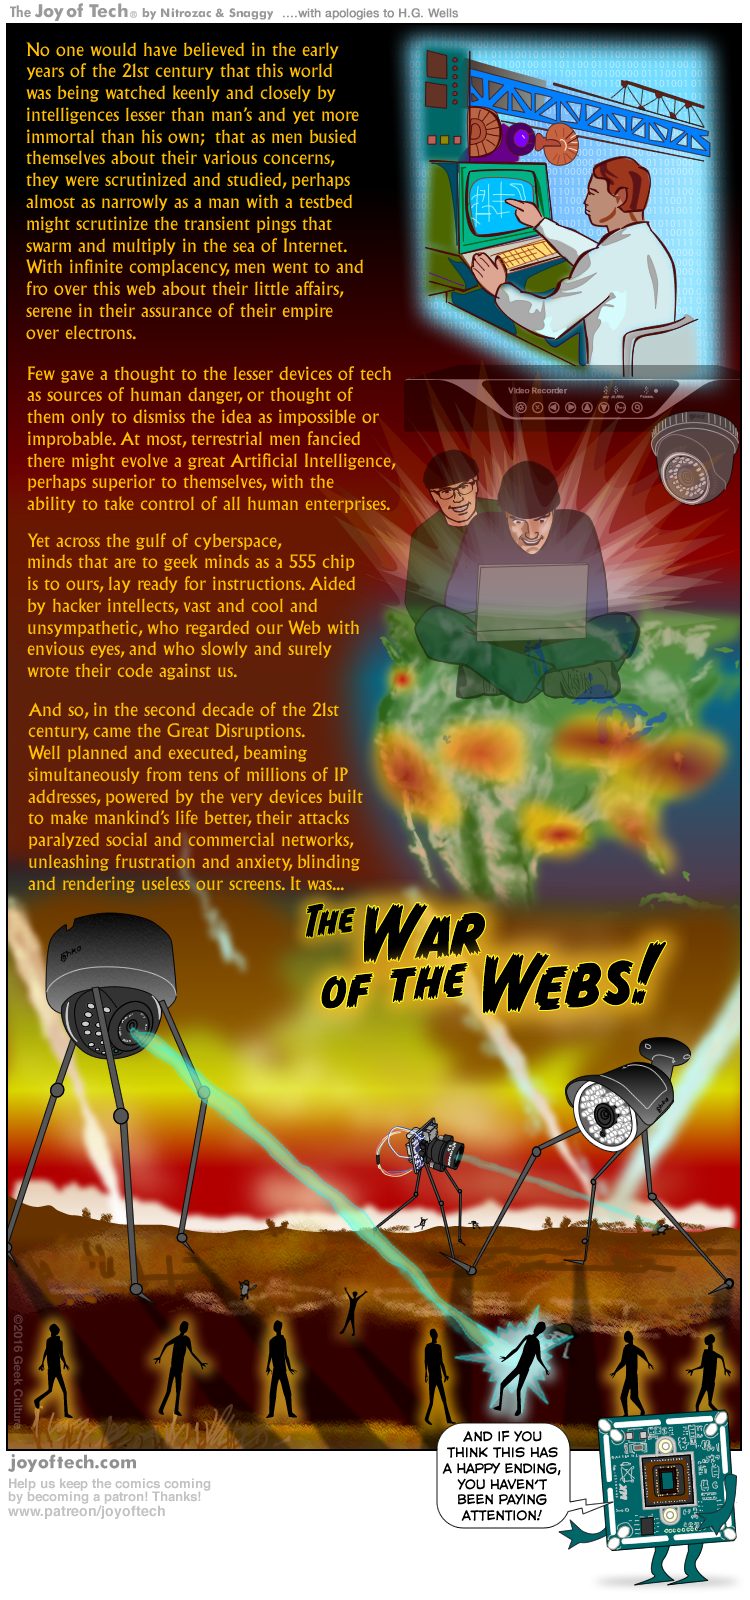 The War of the Webs!